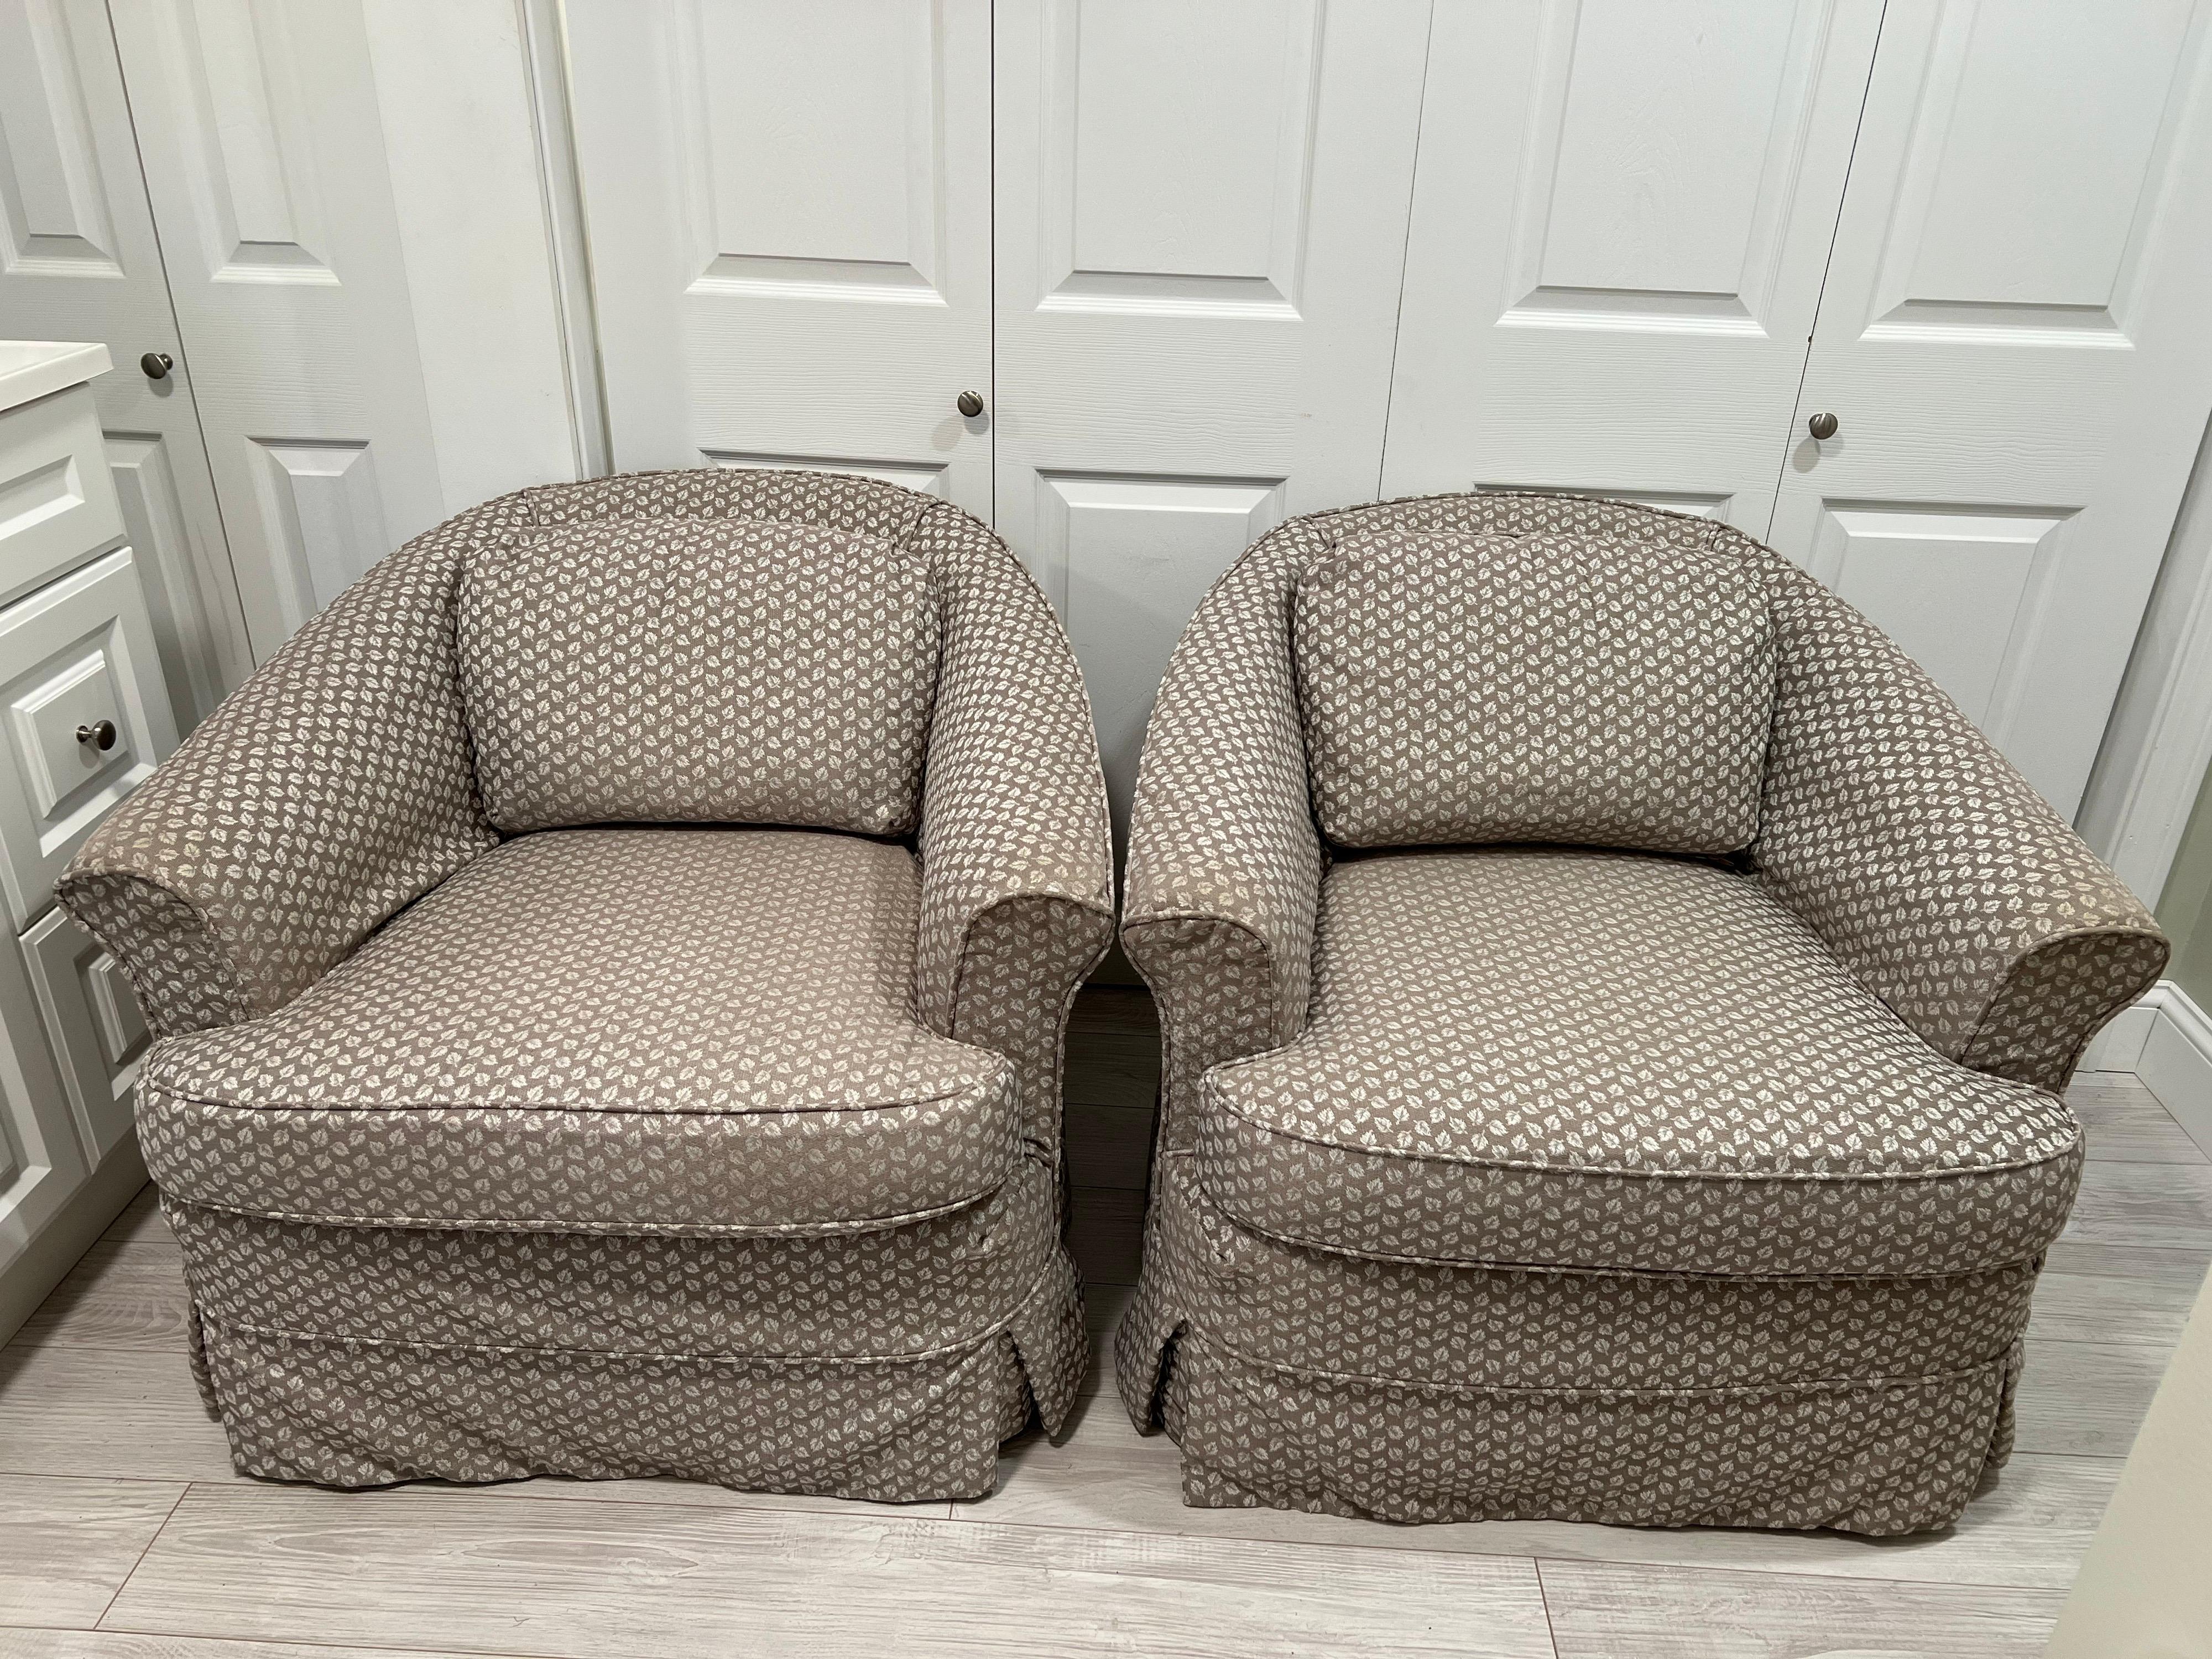 Pair of slip covered club chairs by Drexel. Soft light grey mushroom color geometric fabric slip Cover. Use as is or recover. Classic timeless shape with castors for easy moving. Seat seat width 21